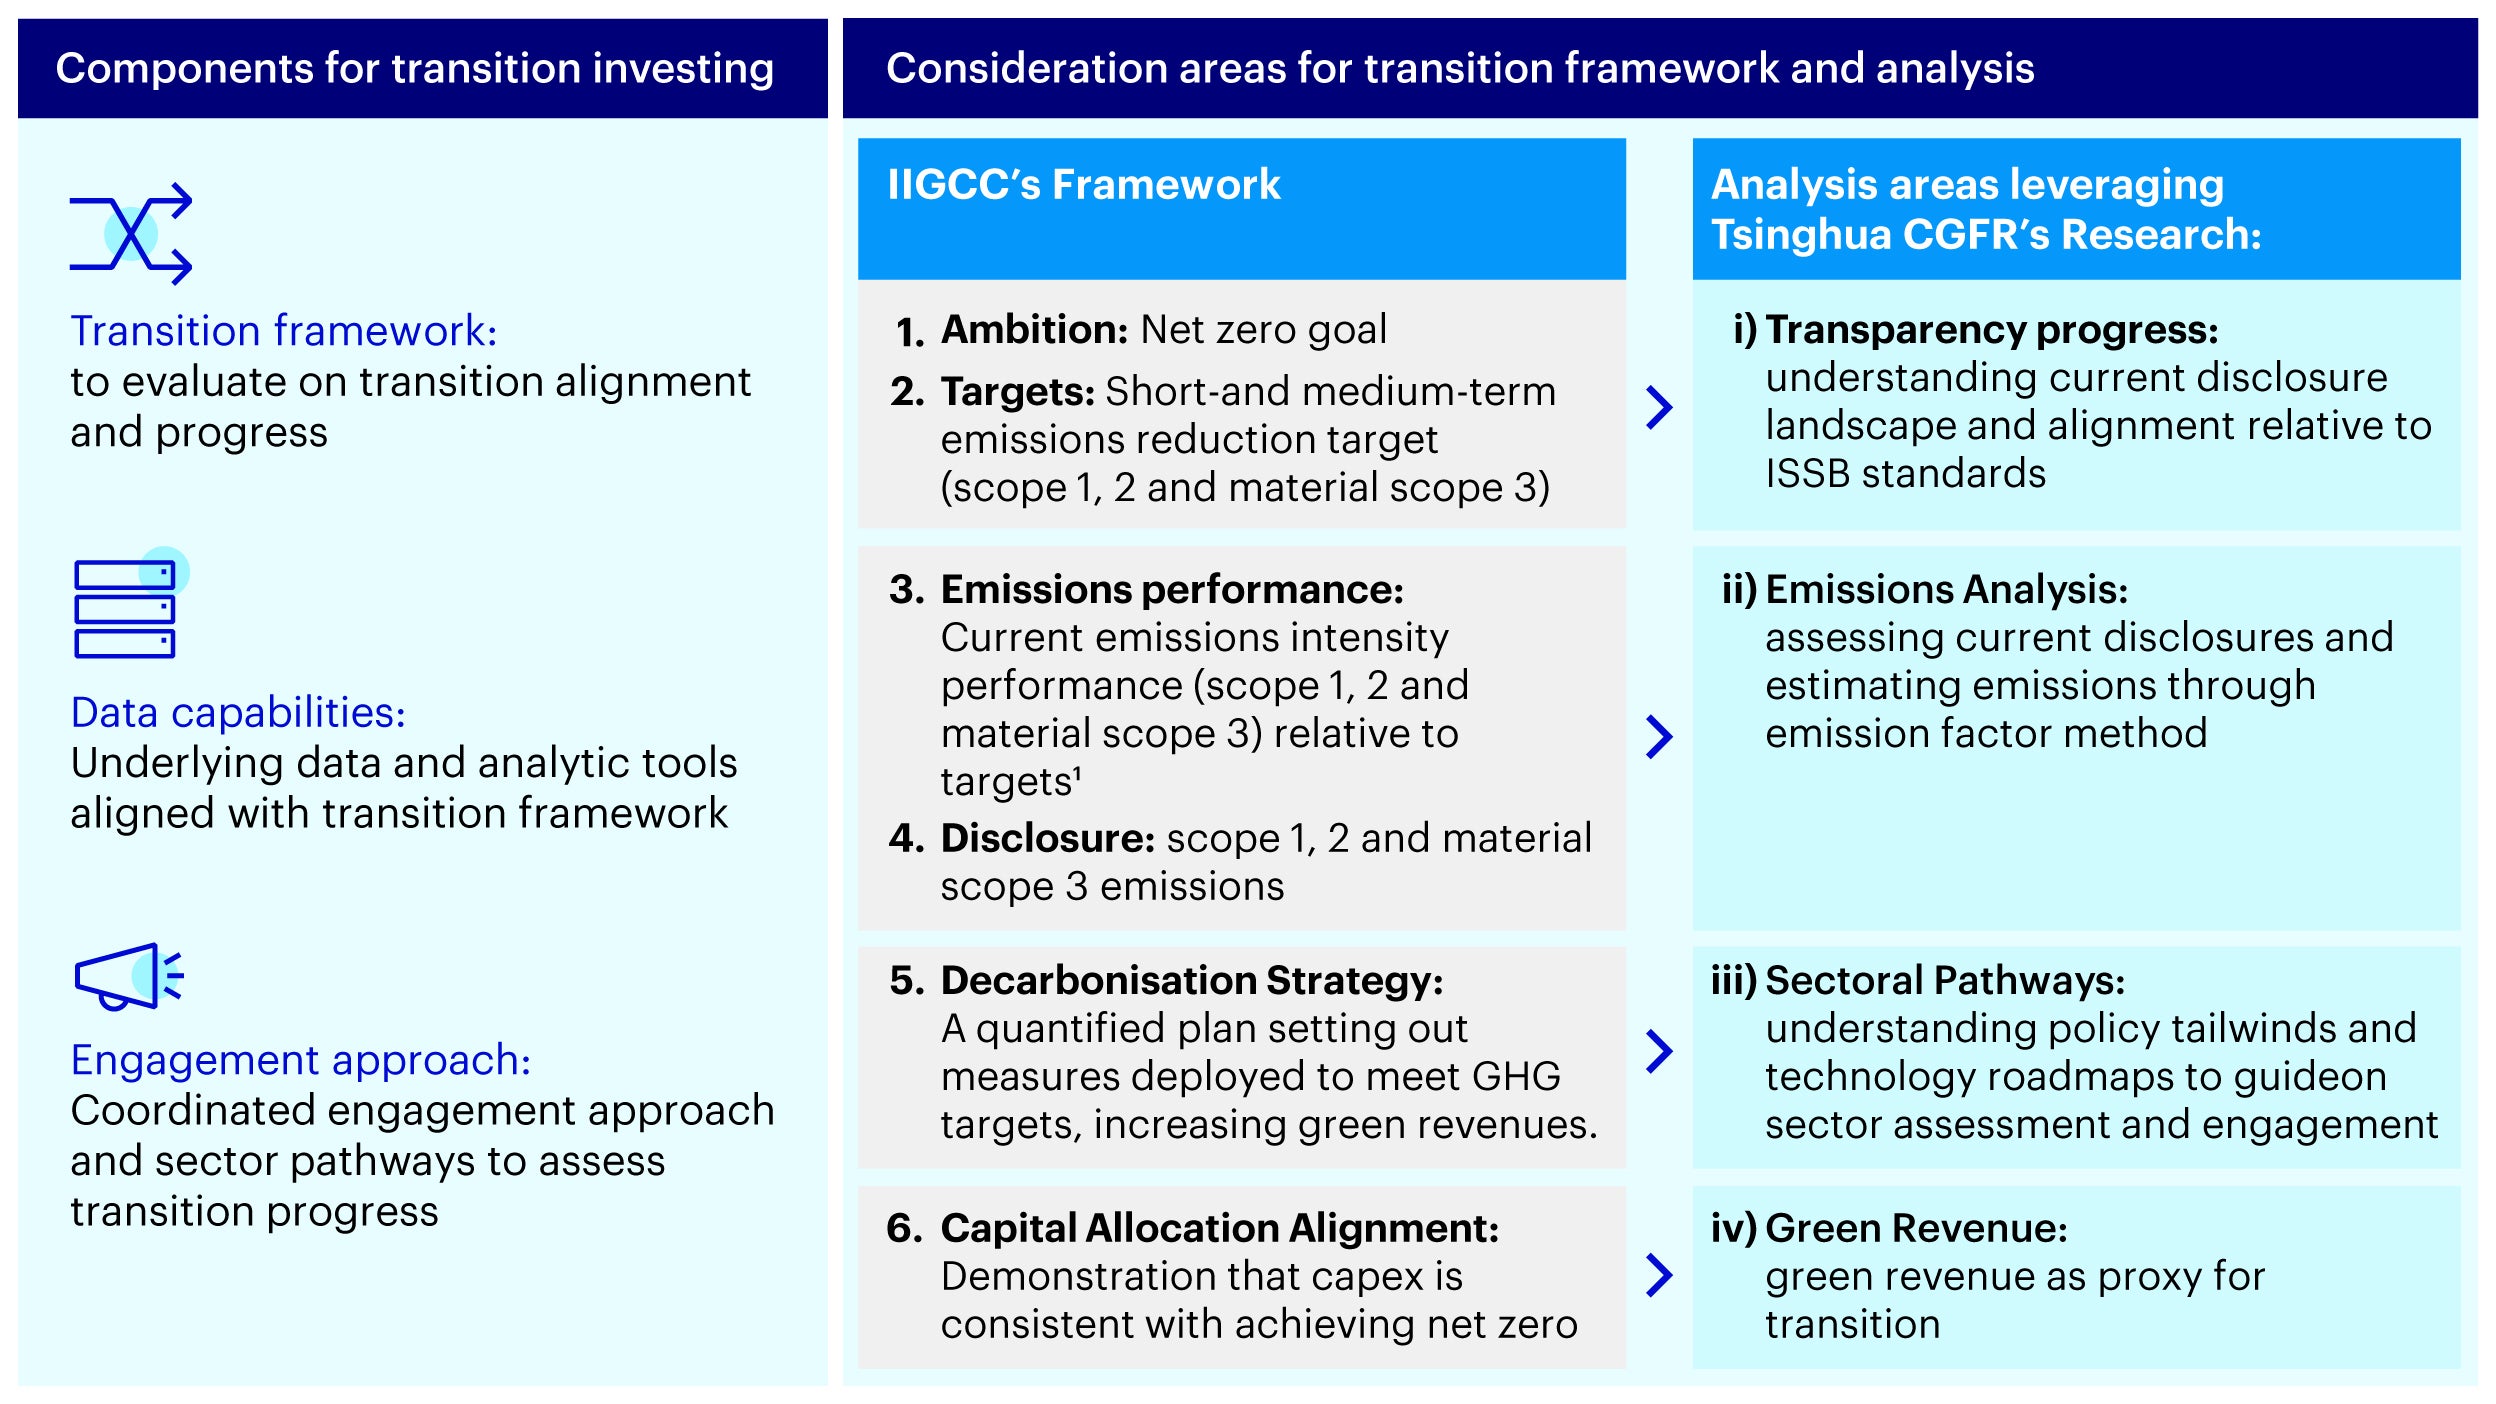 Figure 2 – Transition Investing: Analyzing transition opportunities through looking at transparency/ disclosures, emissions, sectoral pathways, and green revenue 